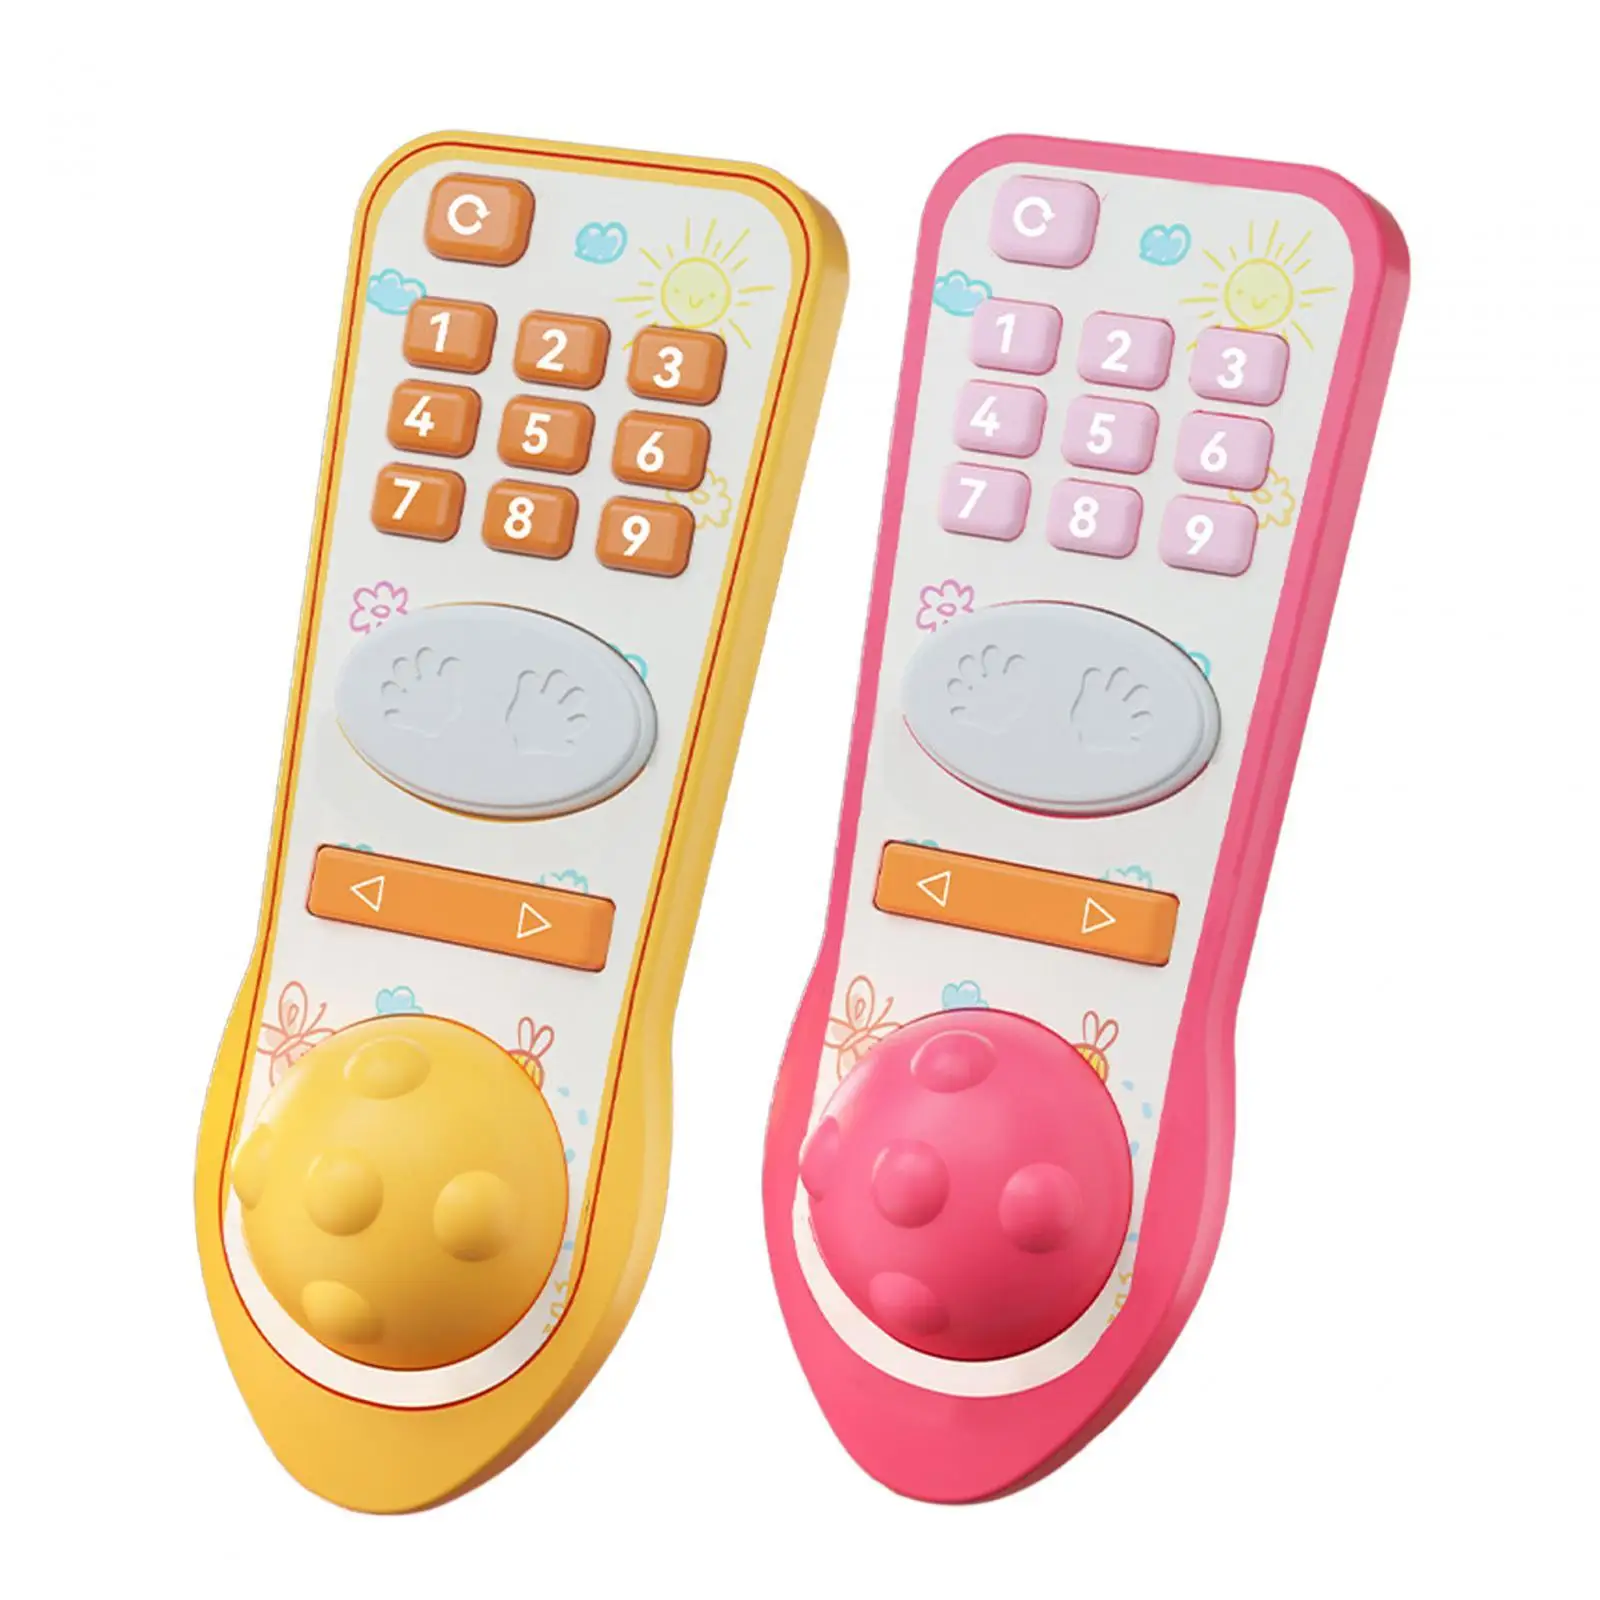 TV Remote Control Toy with Soft Light and Sound Adjustable Volume Durable Early Education for Baby 6 to 12 Months Birthday Gifts